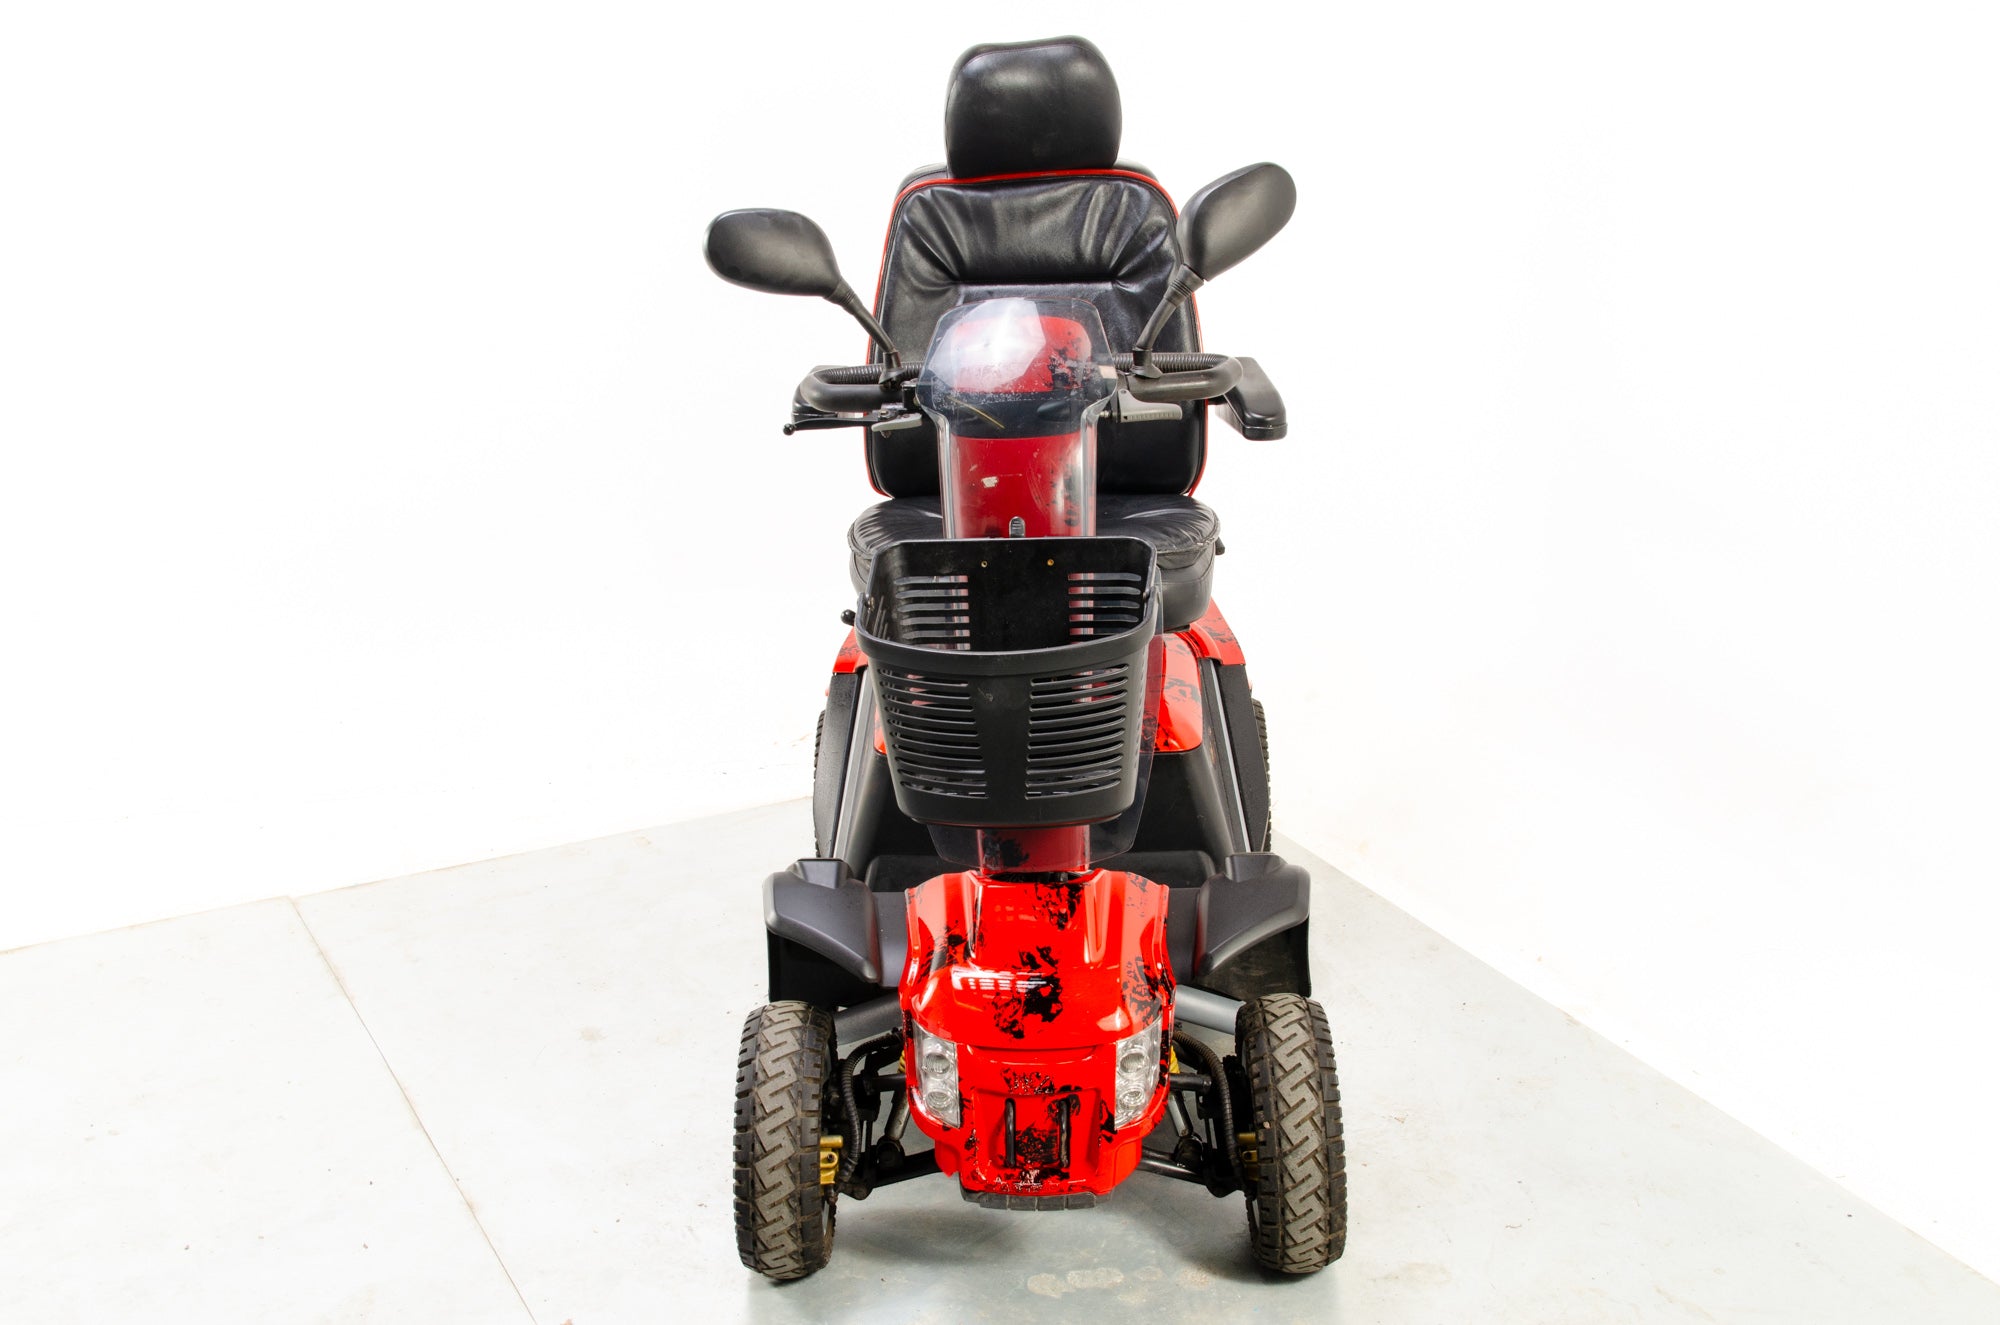 Pride Colt Executive Used Mobility Scooter All-Terrain Off-Road 8mph Road Legal 16017